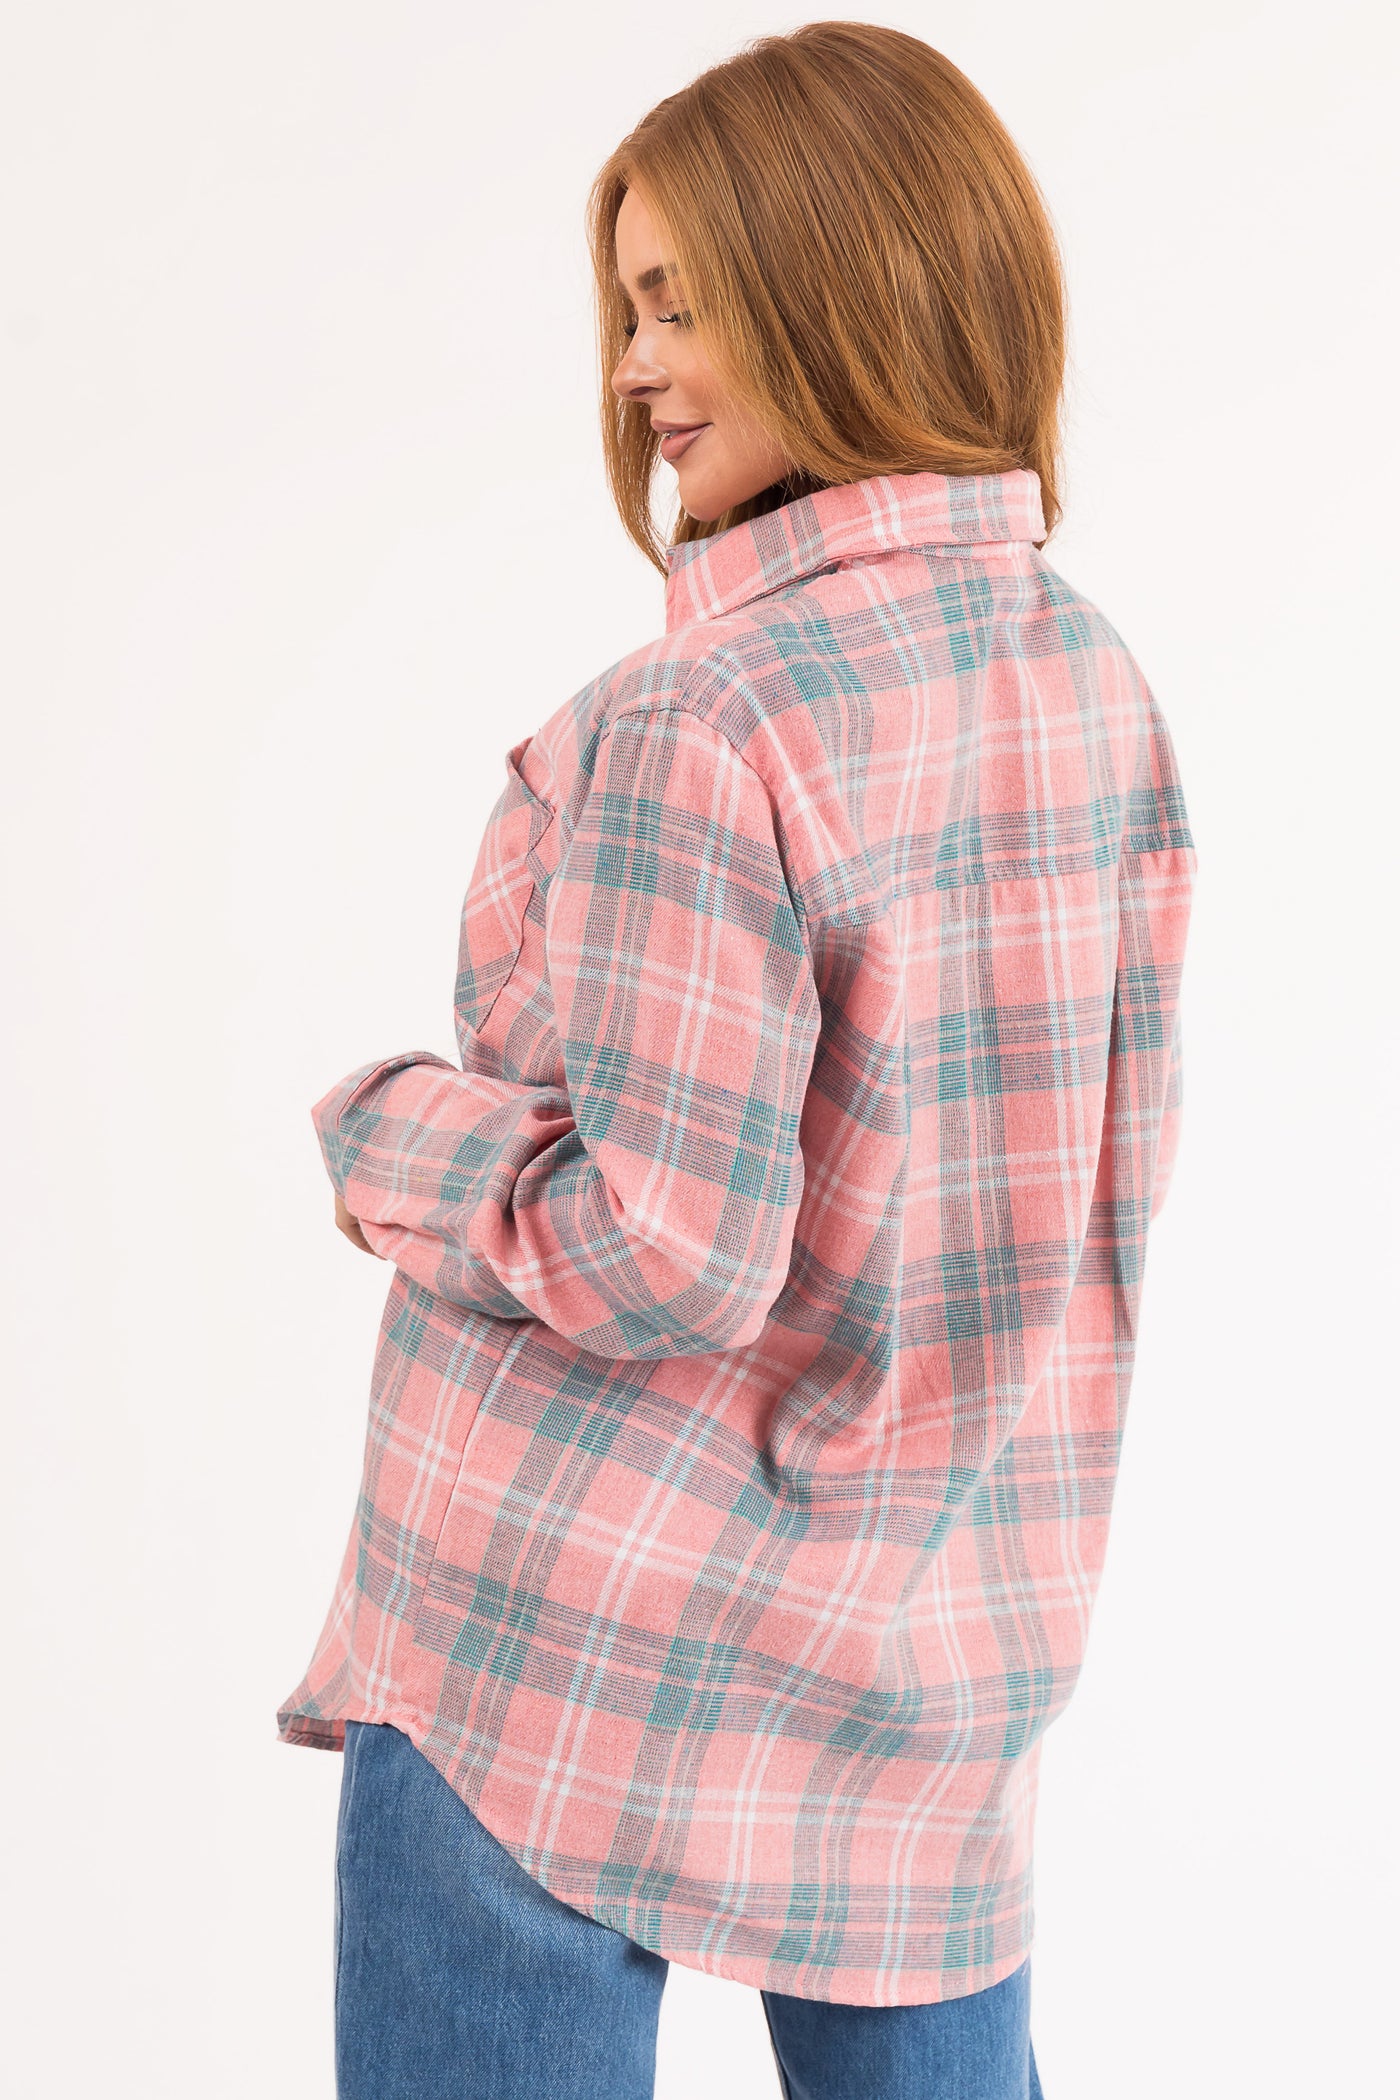 Punch Plaid Front Pocket Button Up Flannel